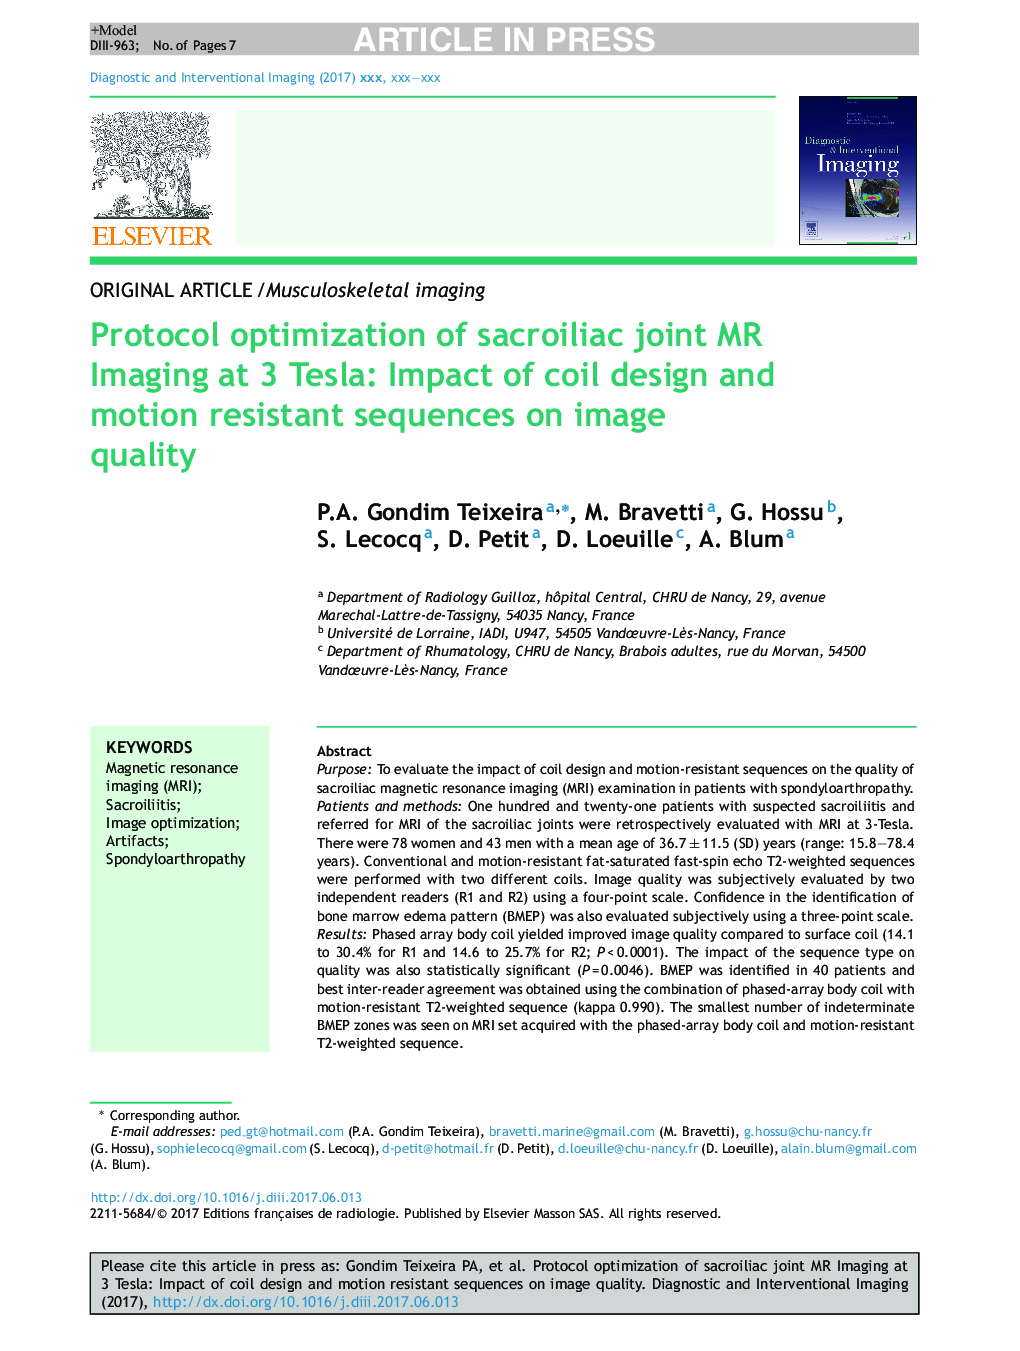 Protocol optimization of sacroiliac joint MR Imaging at 3 Tesla: Impact of coil design and motion resistant sequences on image quality